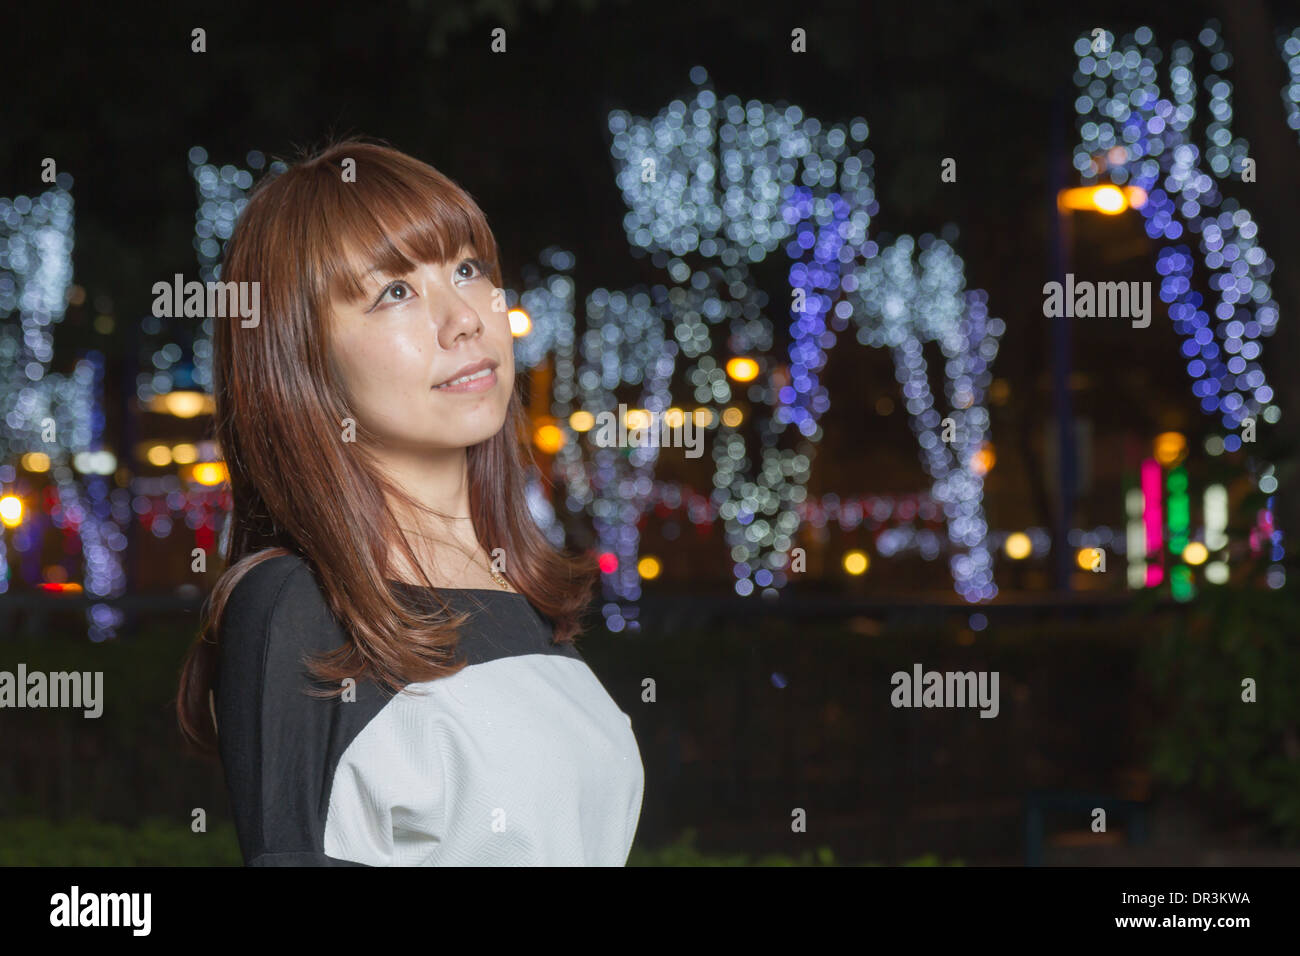 Japanese female outside with volorful lights in background Stock Photo